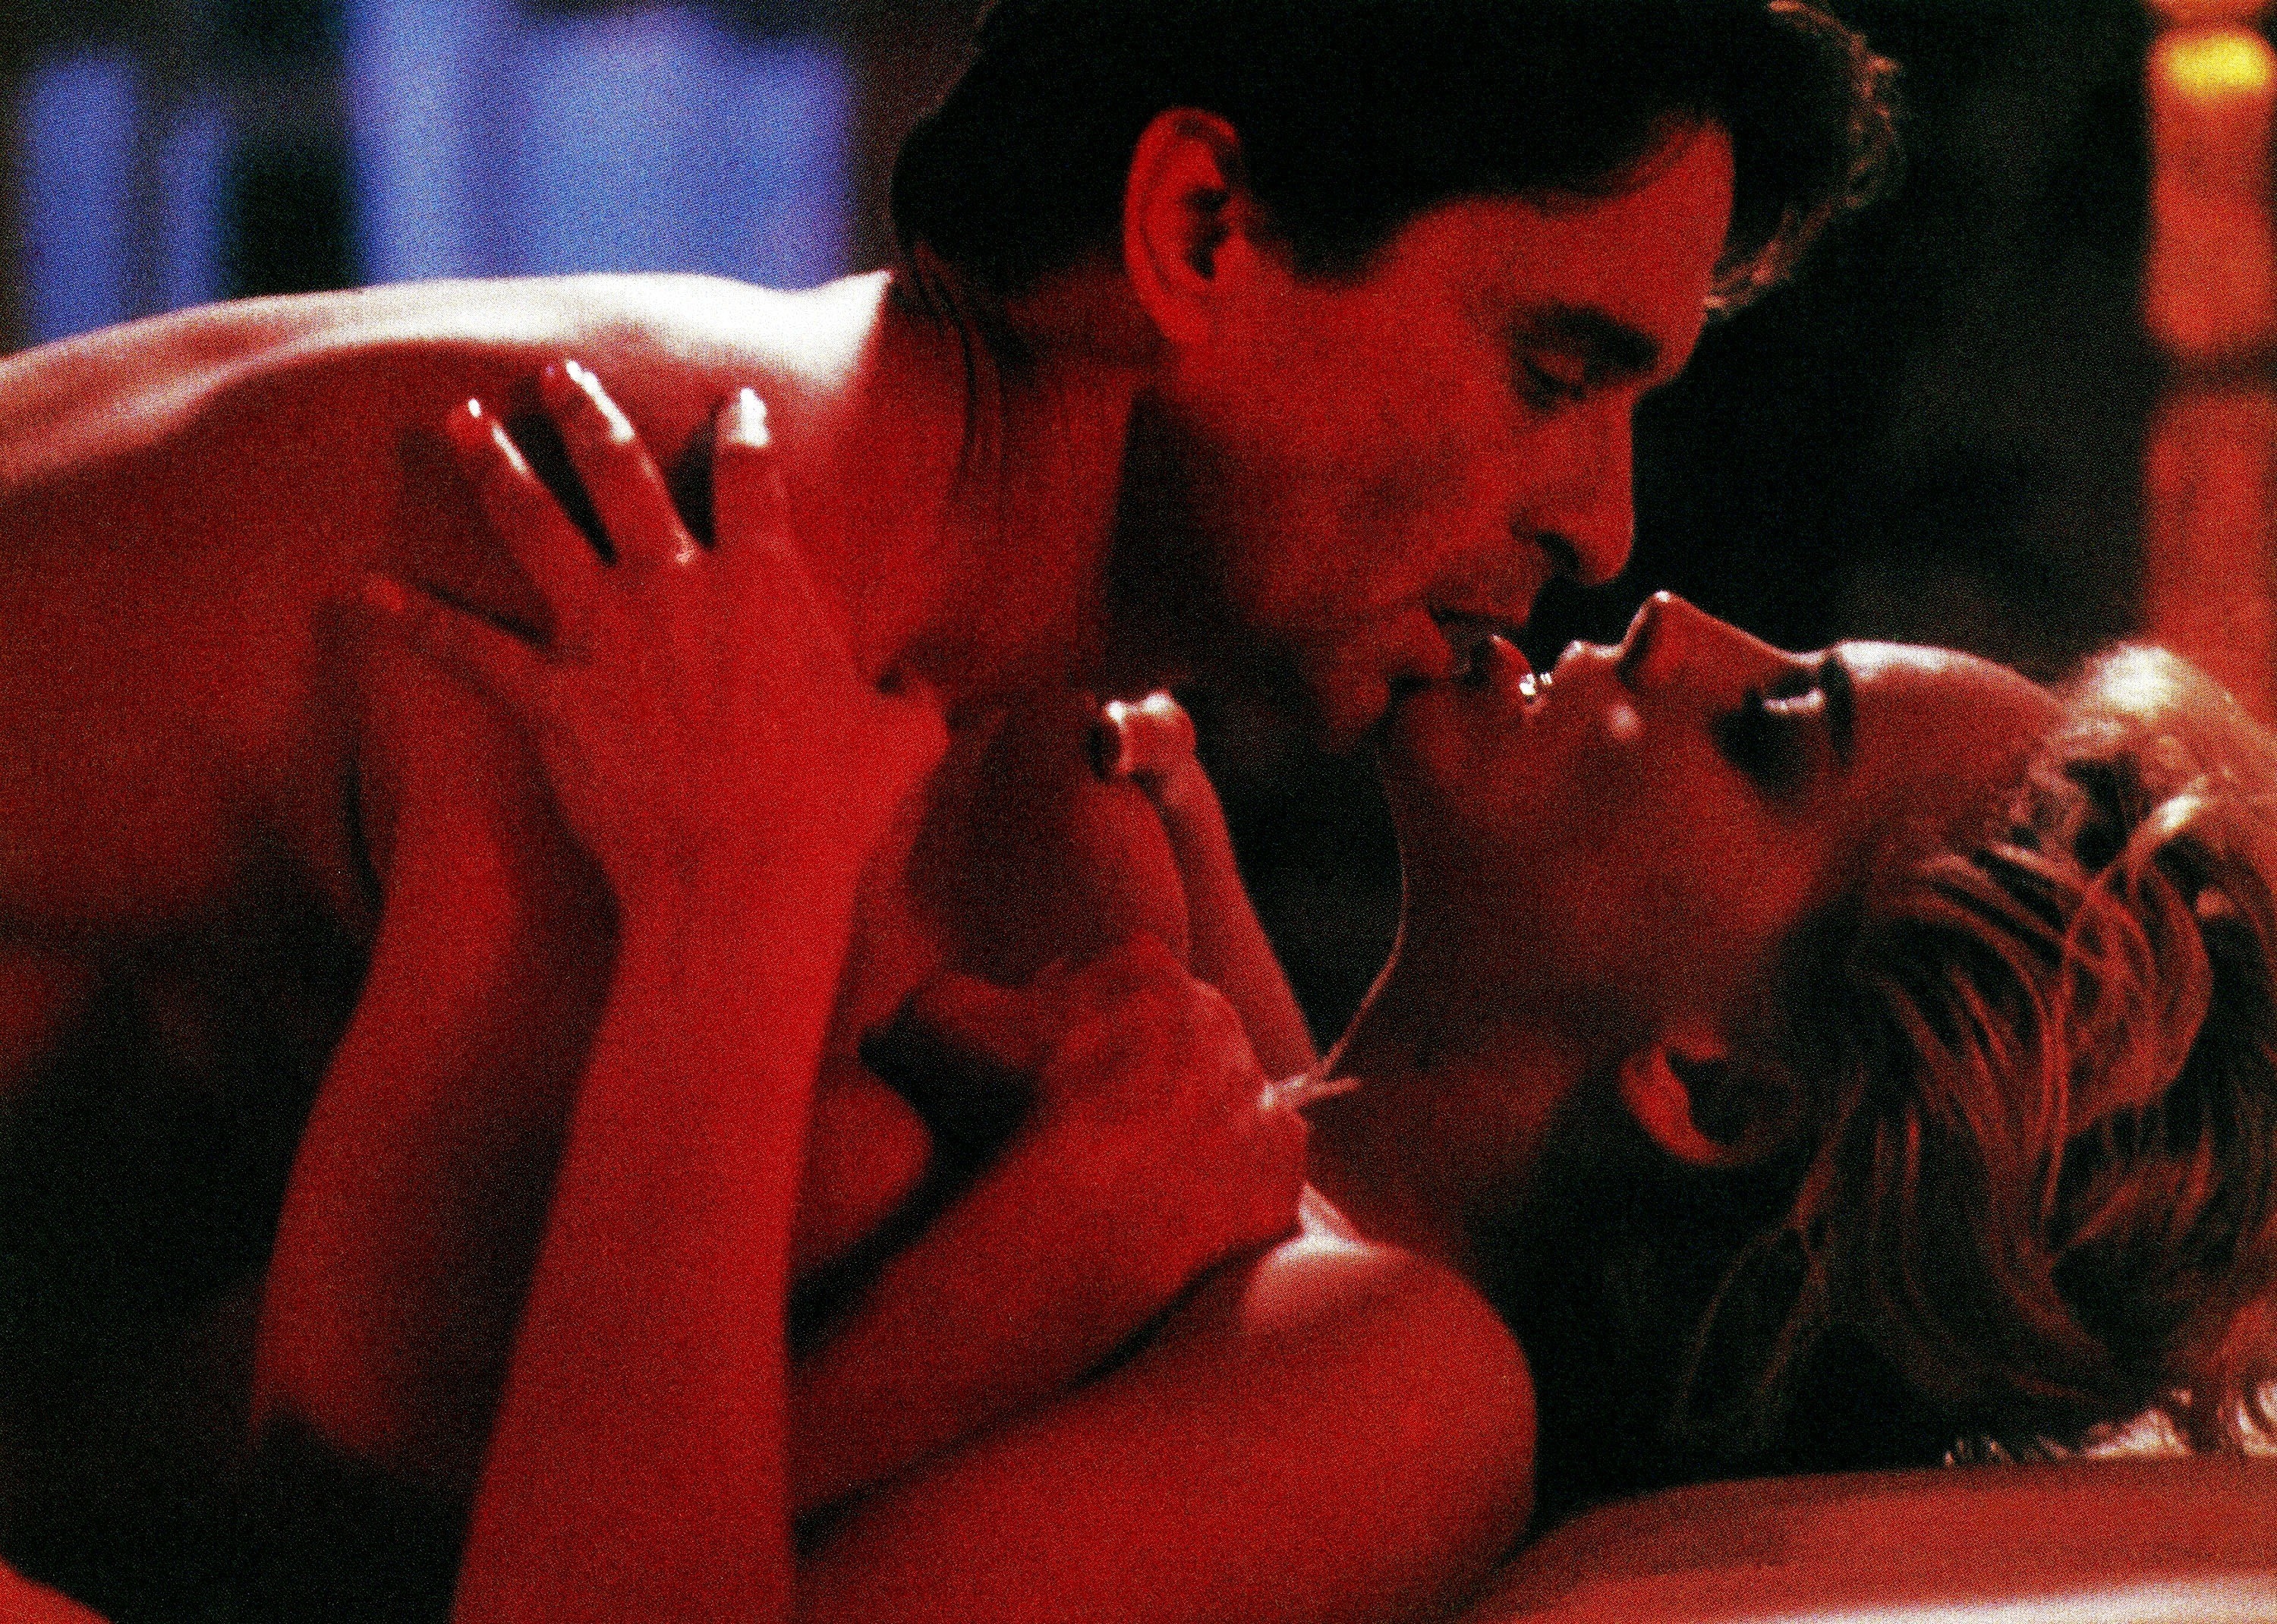 Michael lays on top of Sharon and kisses her in a scene from the film